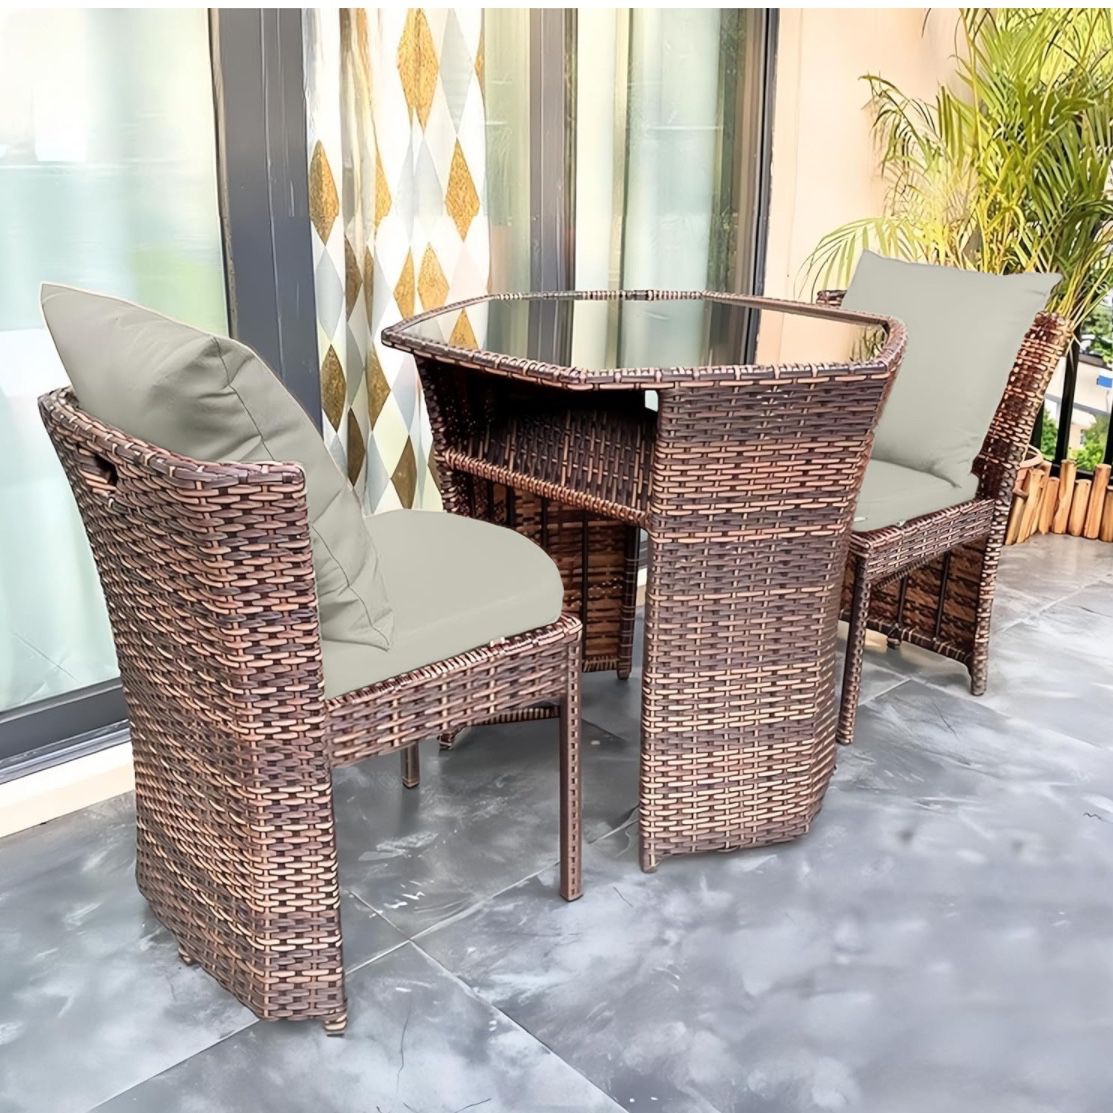 godohome 3 Piece Nordic Minimalist Outdoor Rattan Wicker Chair and Hexagonal Table Set – Weatherproof and Comfort Design Perfect for Patio and Courtya